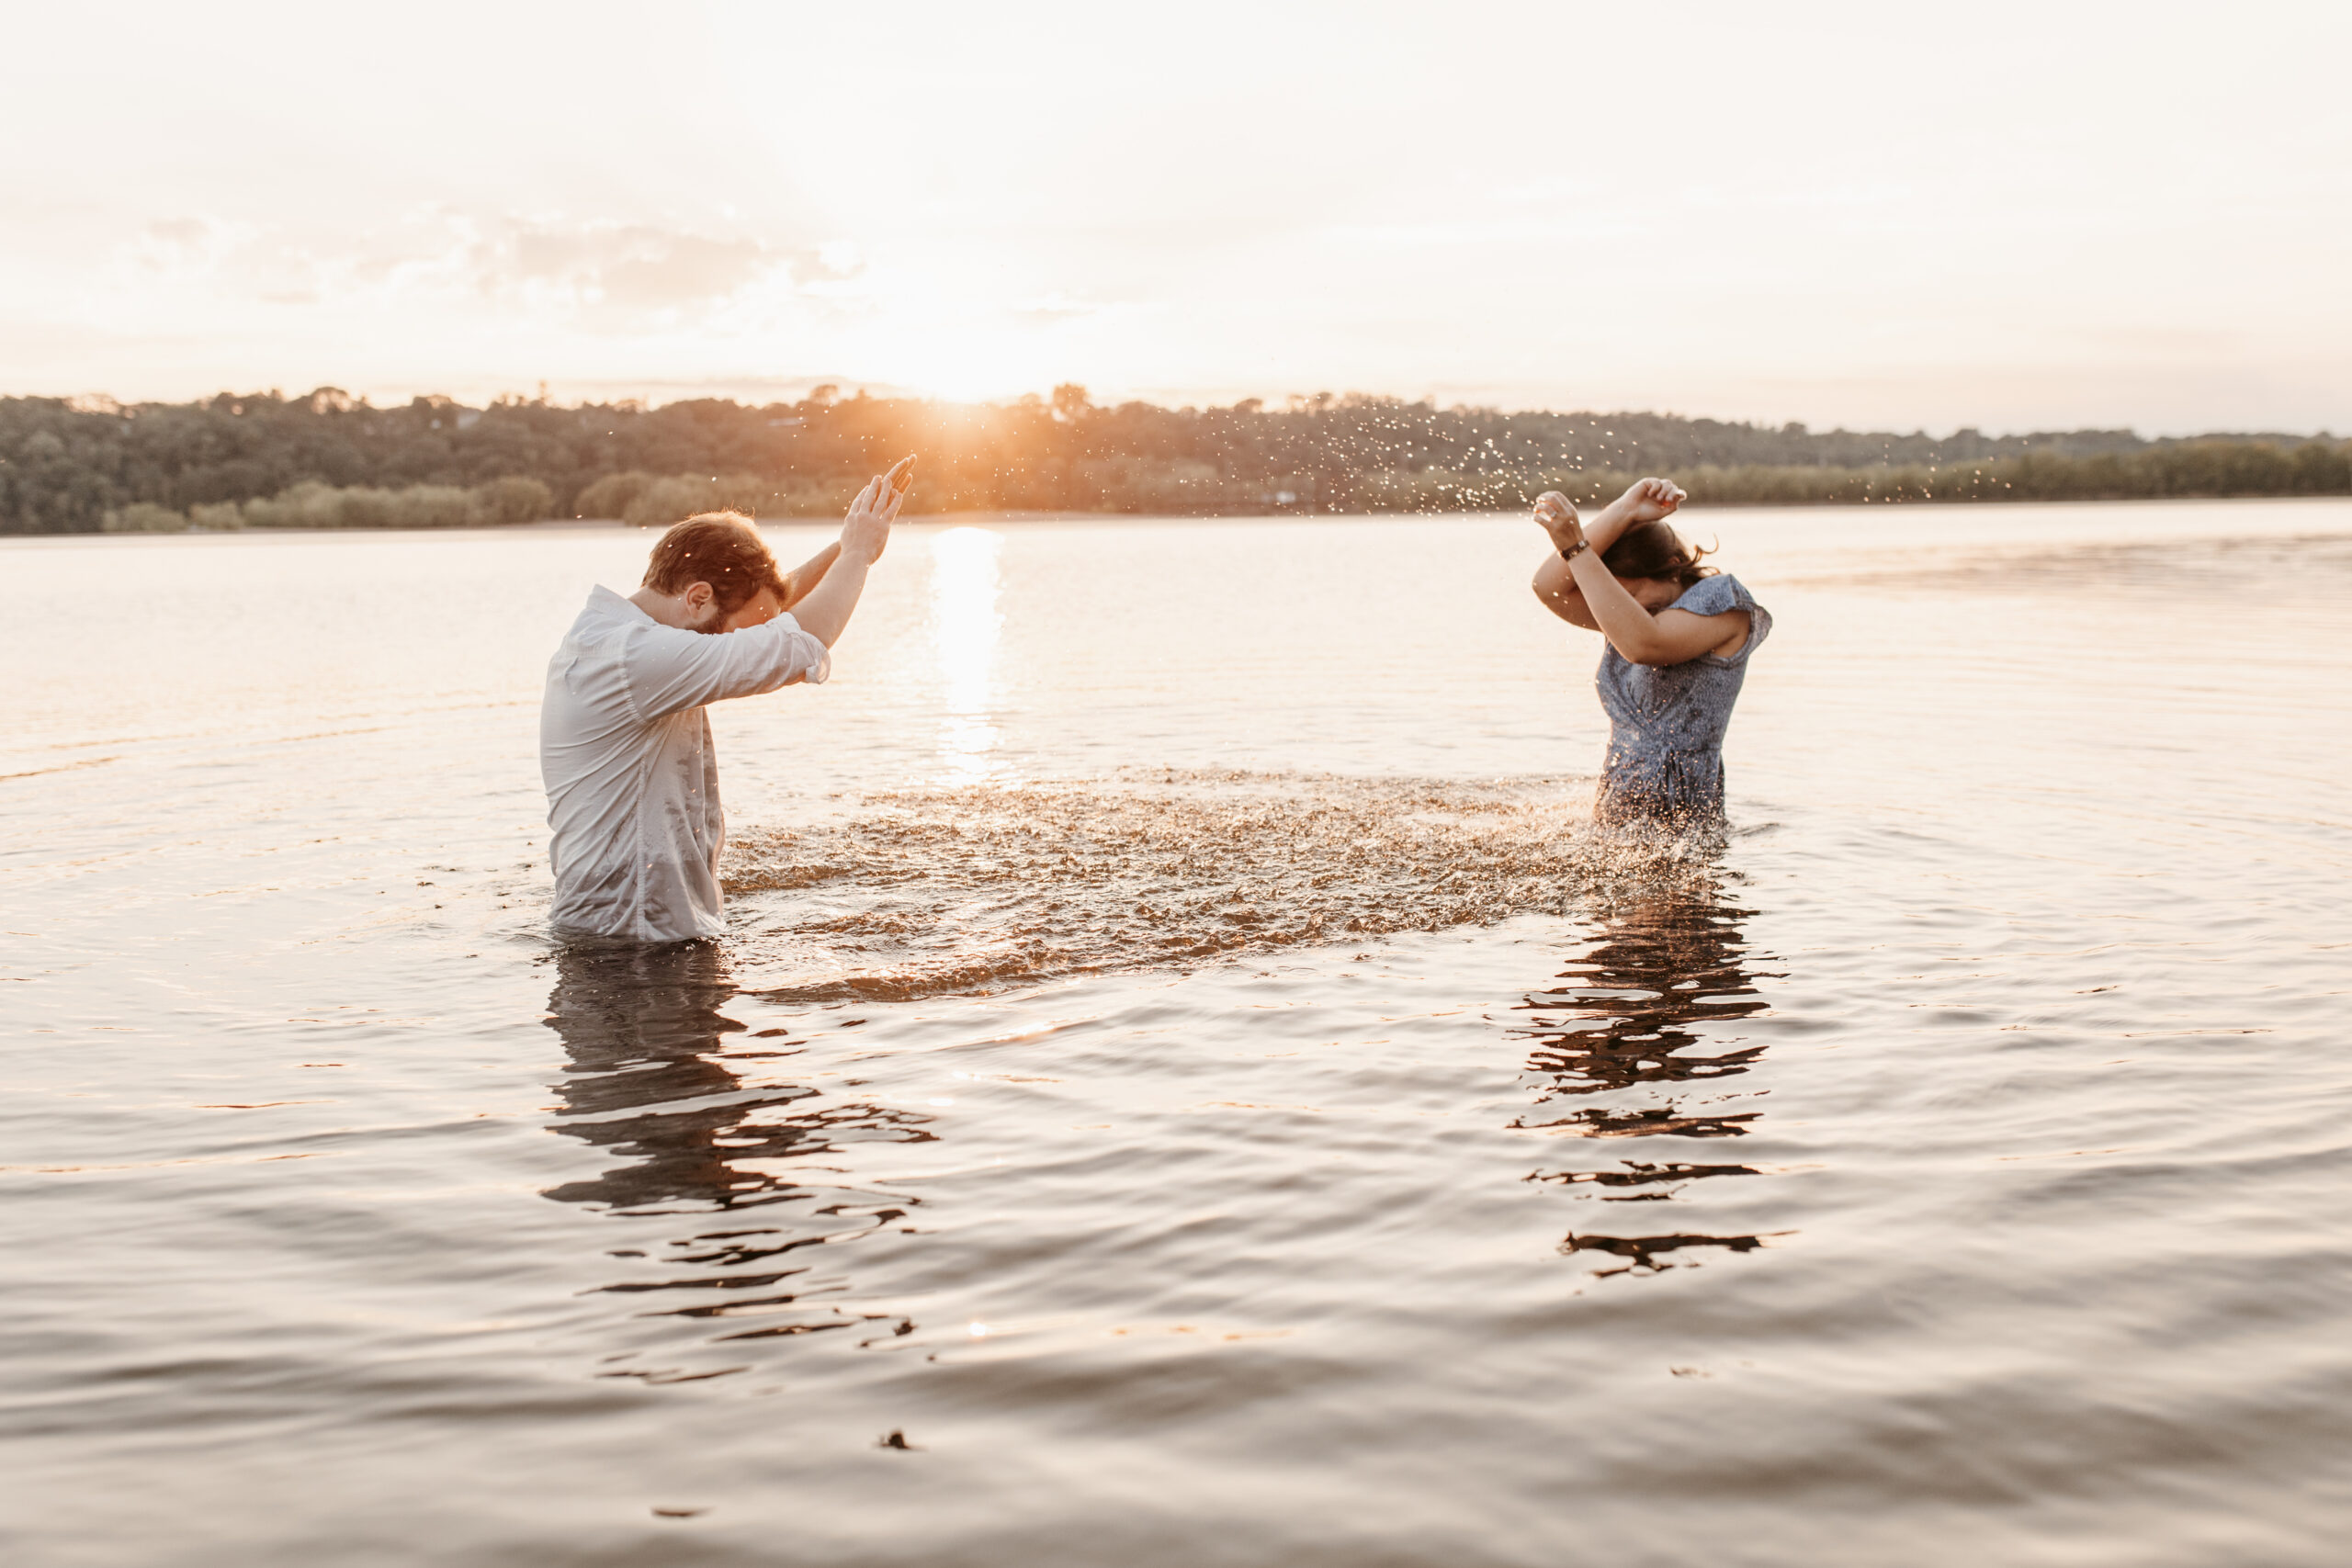 man and woman splashing each other in a lake fully clothed at sunset for their anniversary photos